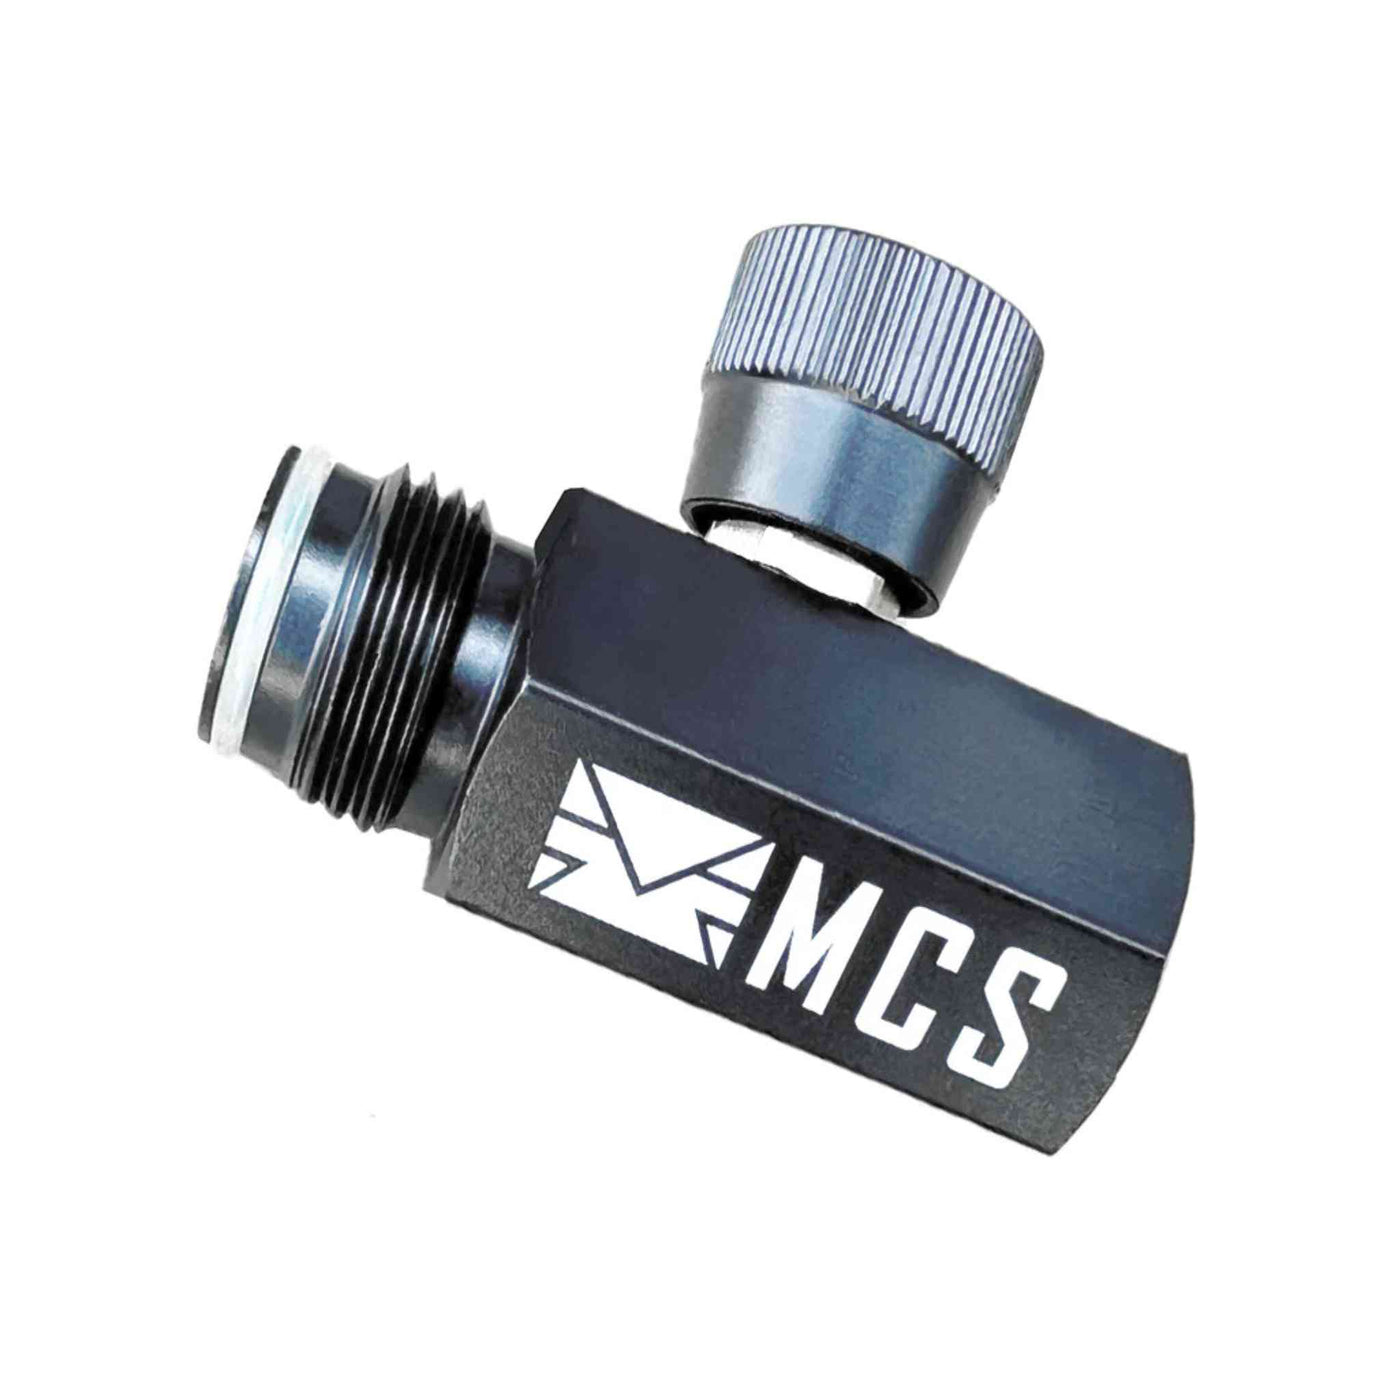 PCP AirGun Emergency Defense Valve 88g Co2 Adapter with On/Off Valve